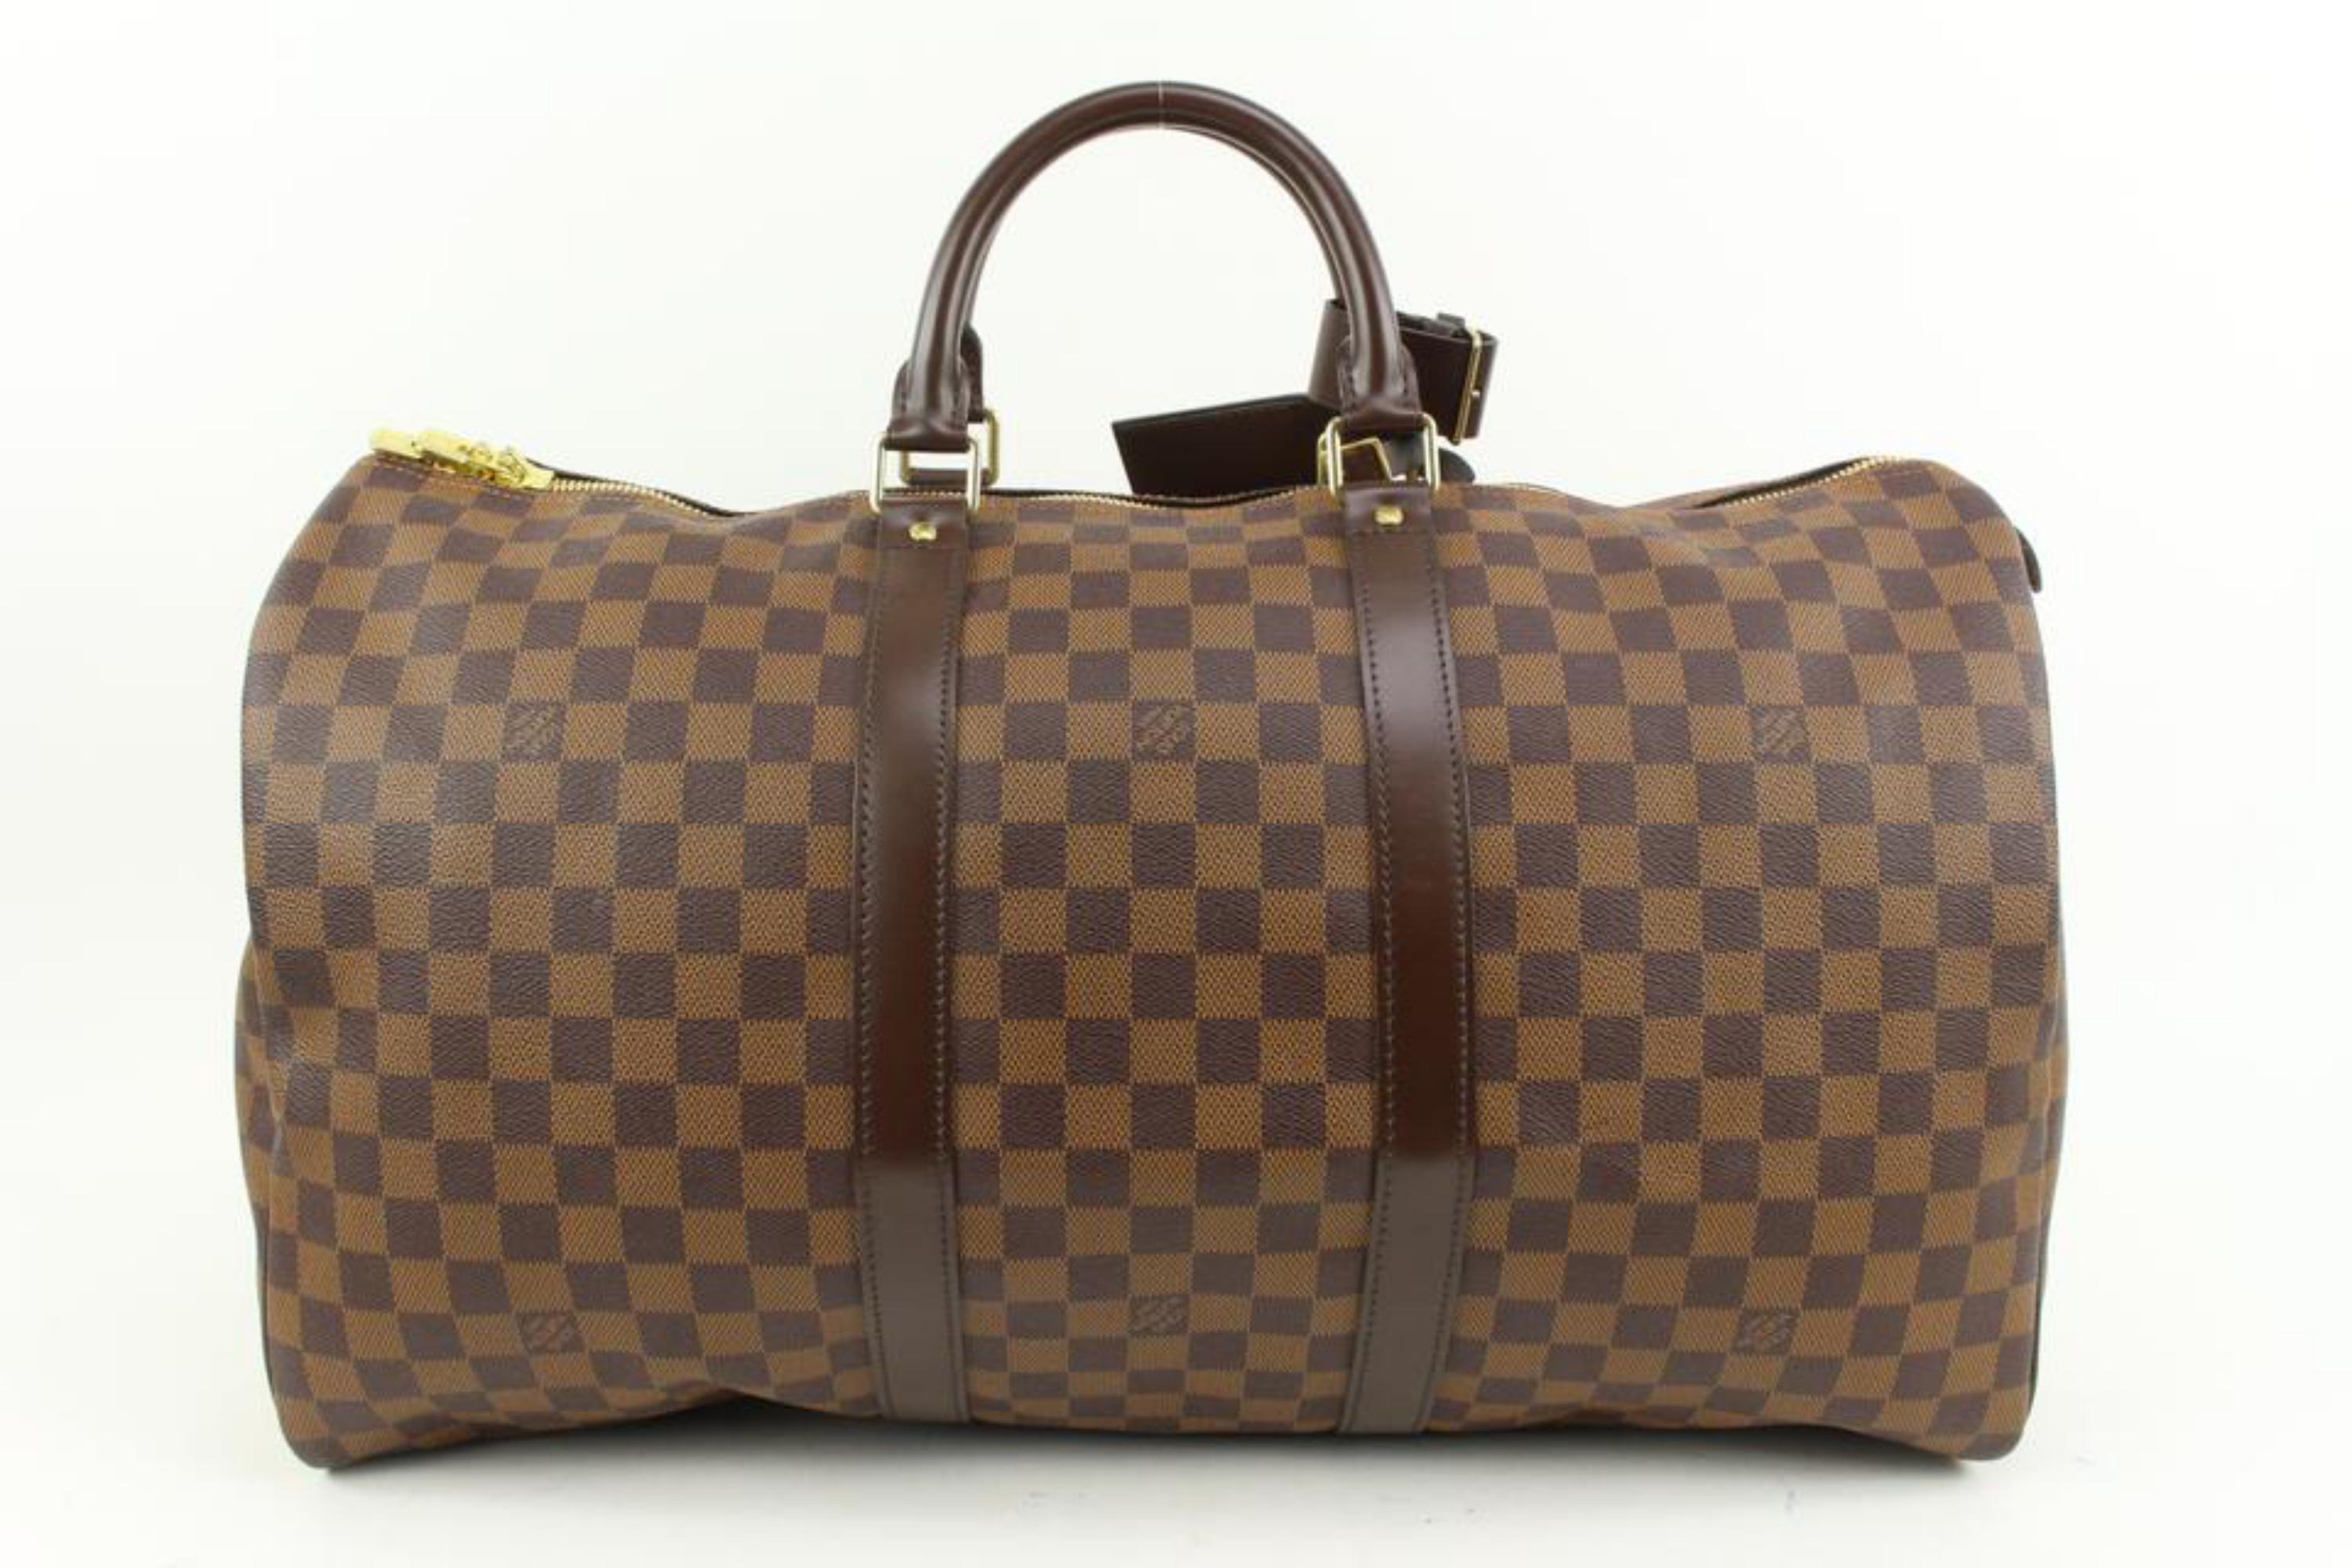 Louis Vuitton Damier Ebene Keepall 50 Duffle bag 82lv39s In Good Condition For Sale In Dix hills, NY